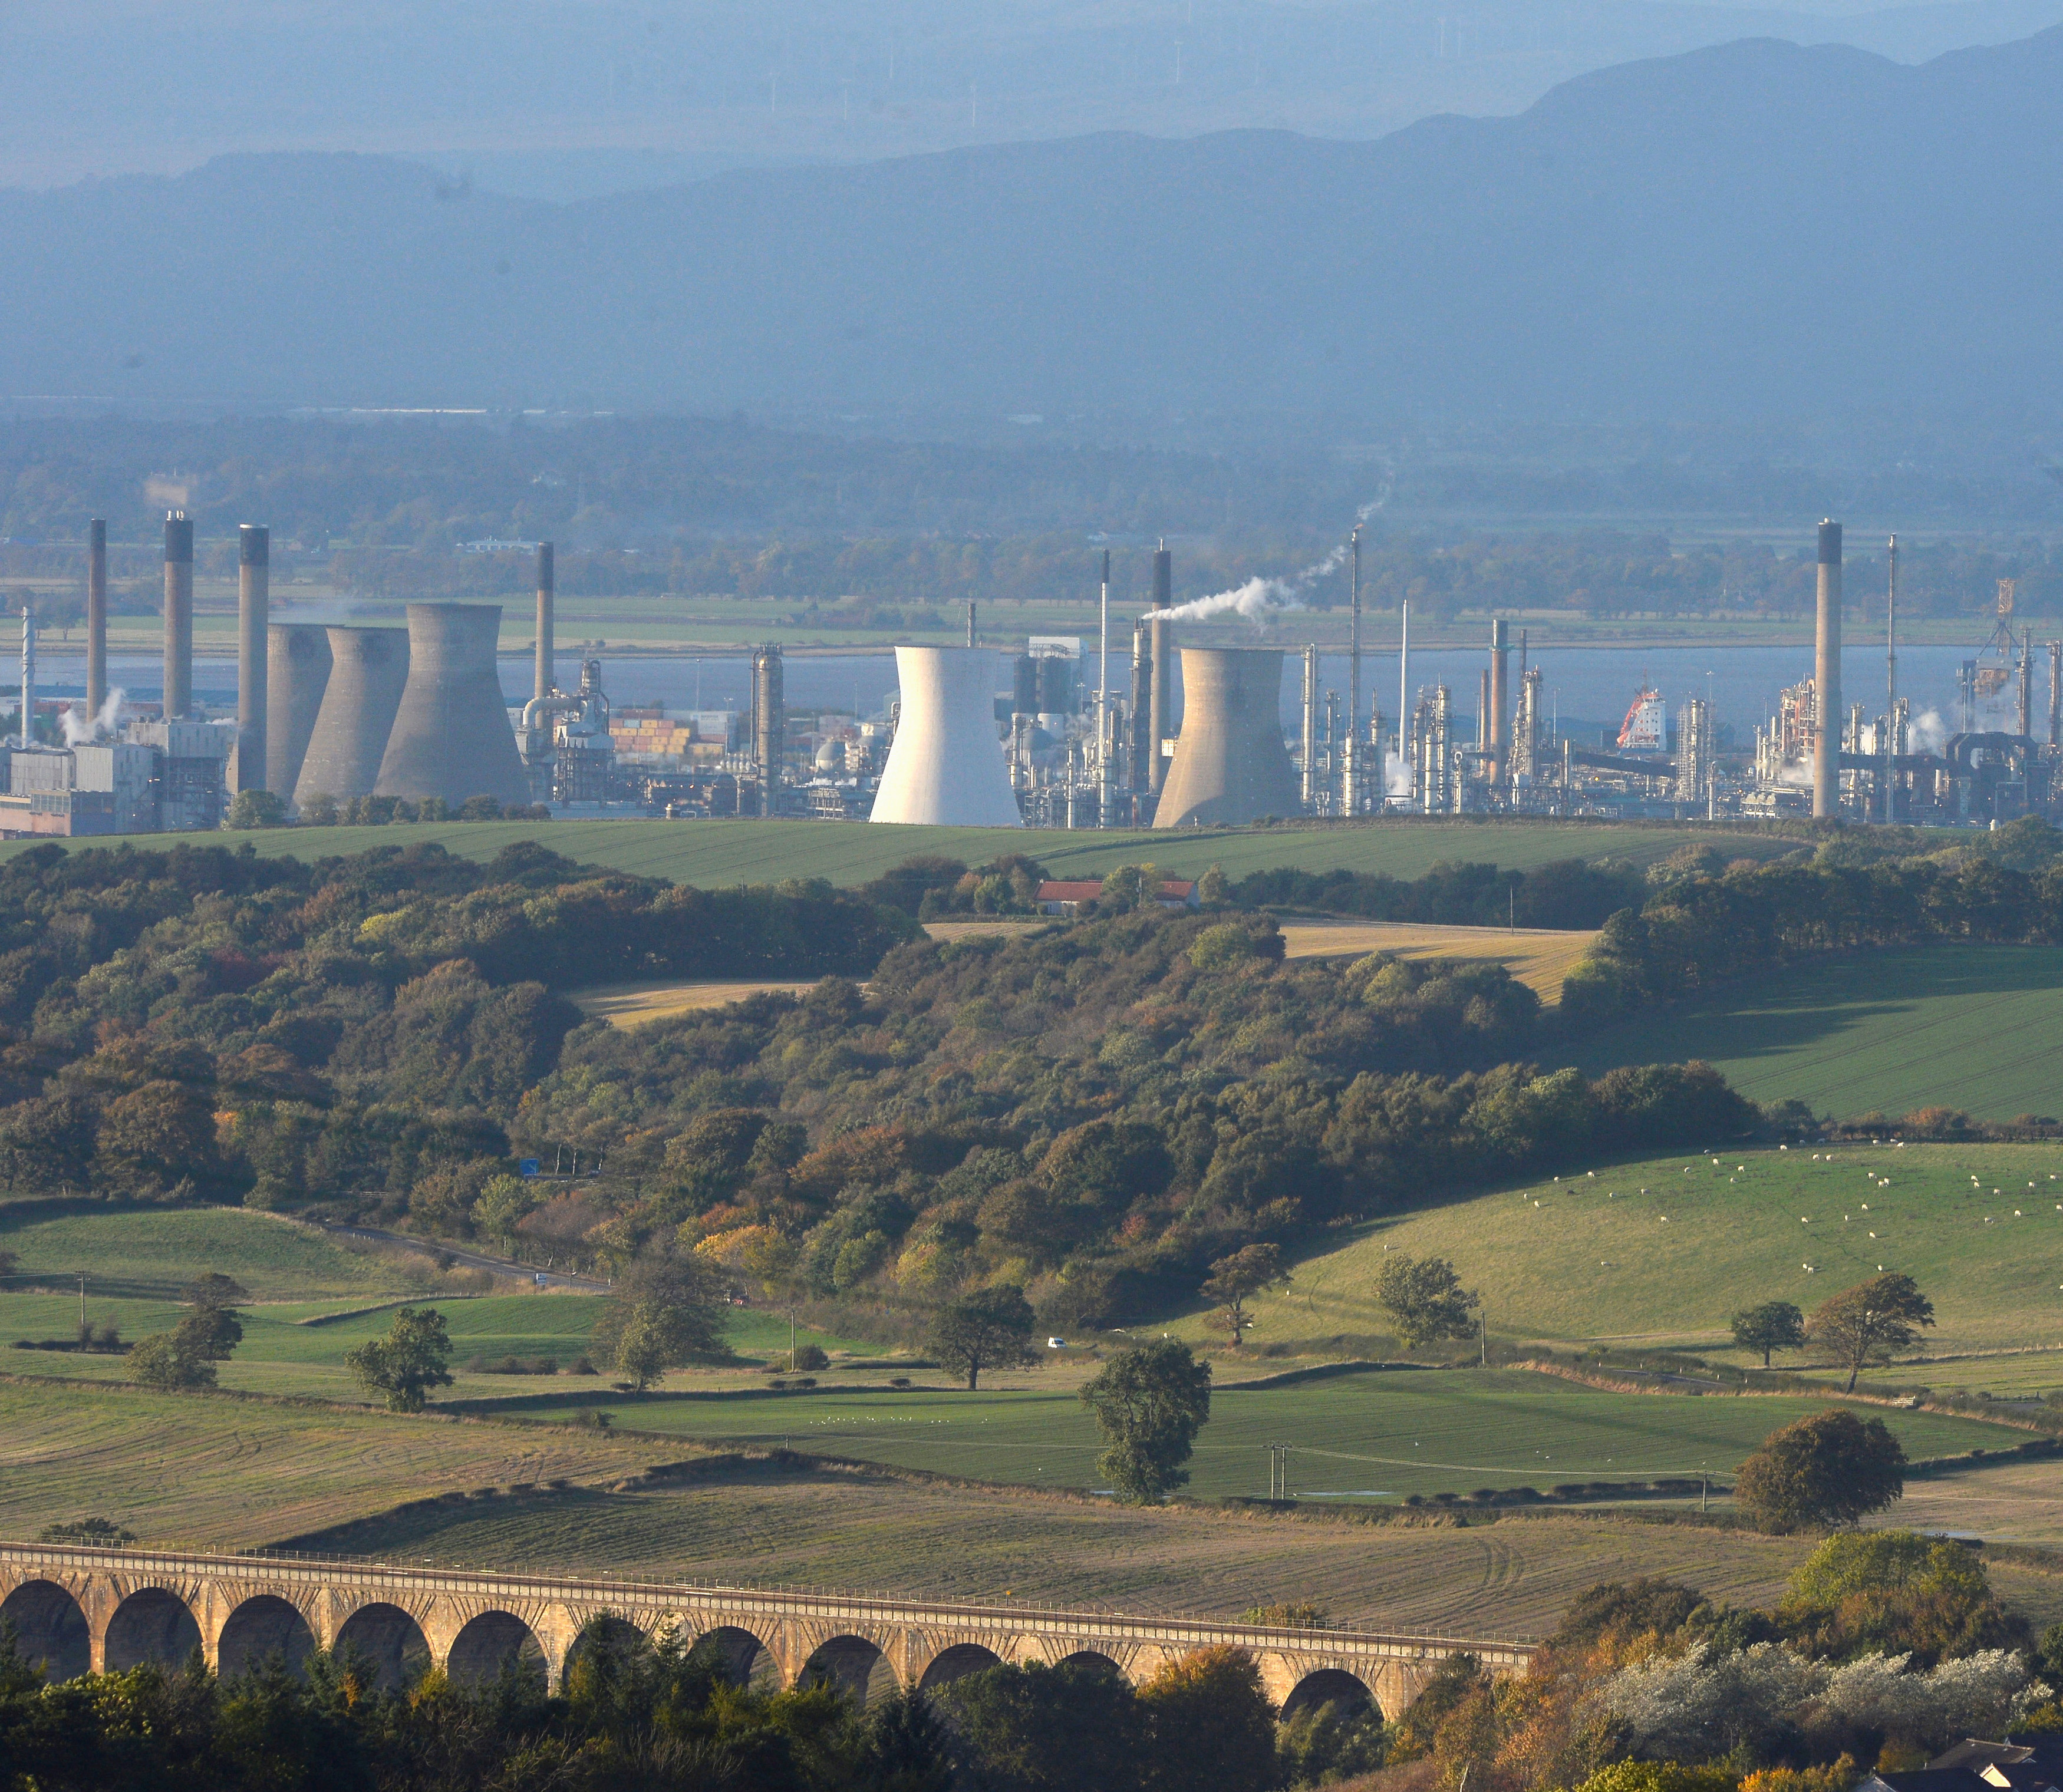 A general view of the Grangemouth refinery in east Scotland